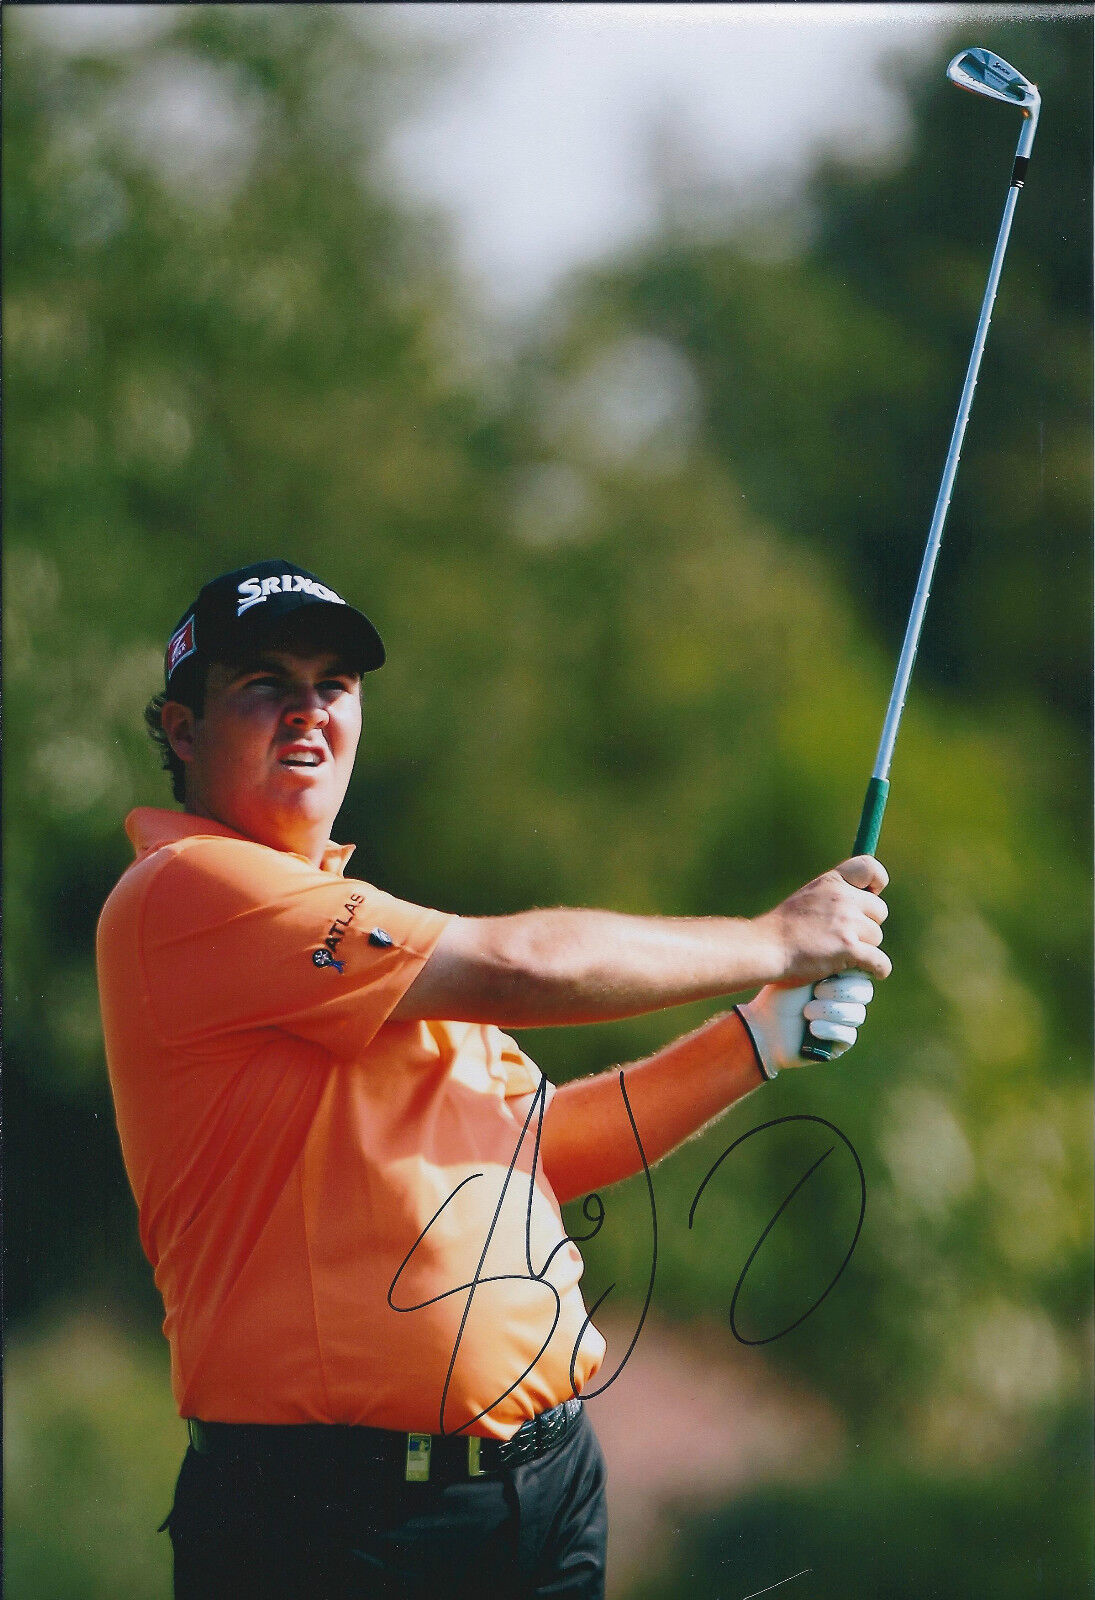 Shane LOWRY SIGNED AUTOGRAPH 12x8 Photo Poster painting AFTAL COA Portugal Masters Tour Winner